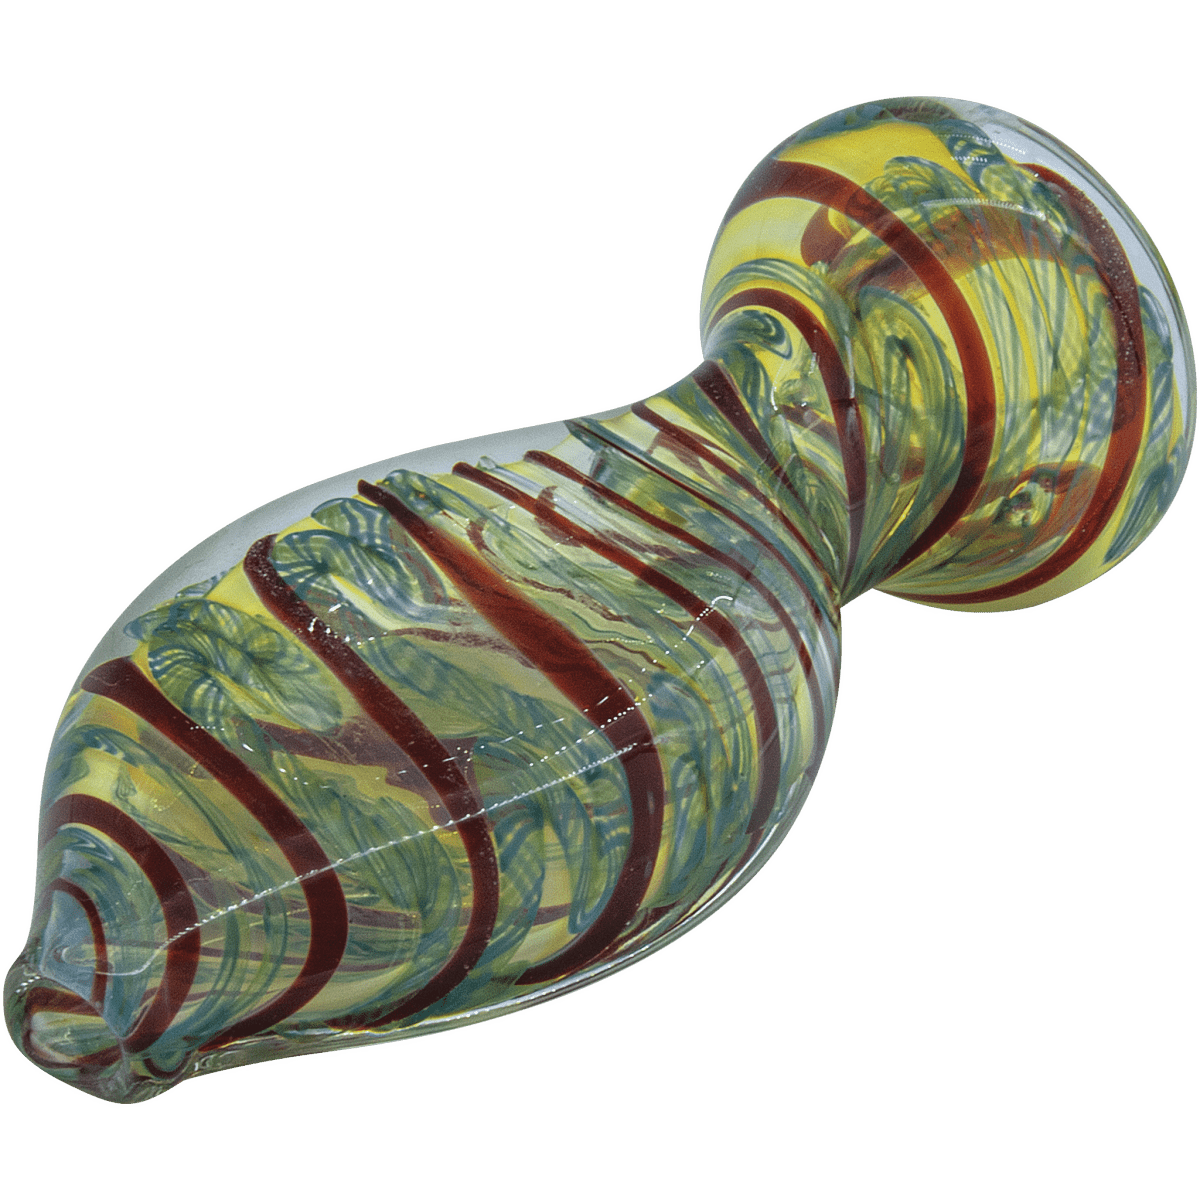 LA Pipes Hand Pipe Red Hues "Flat Belly" Inside-Out Chillum